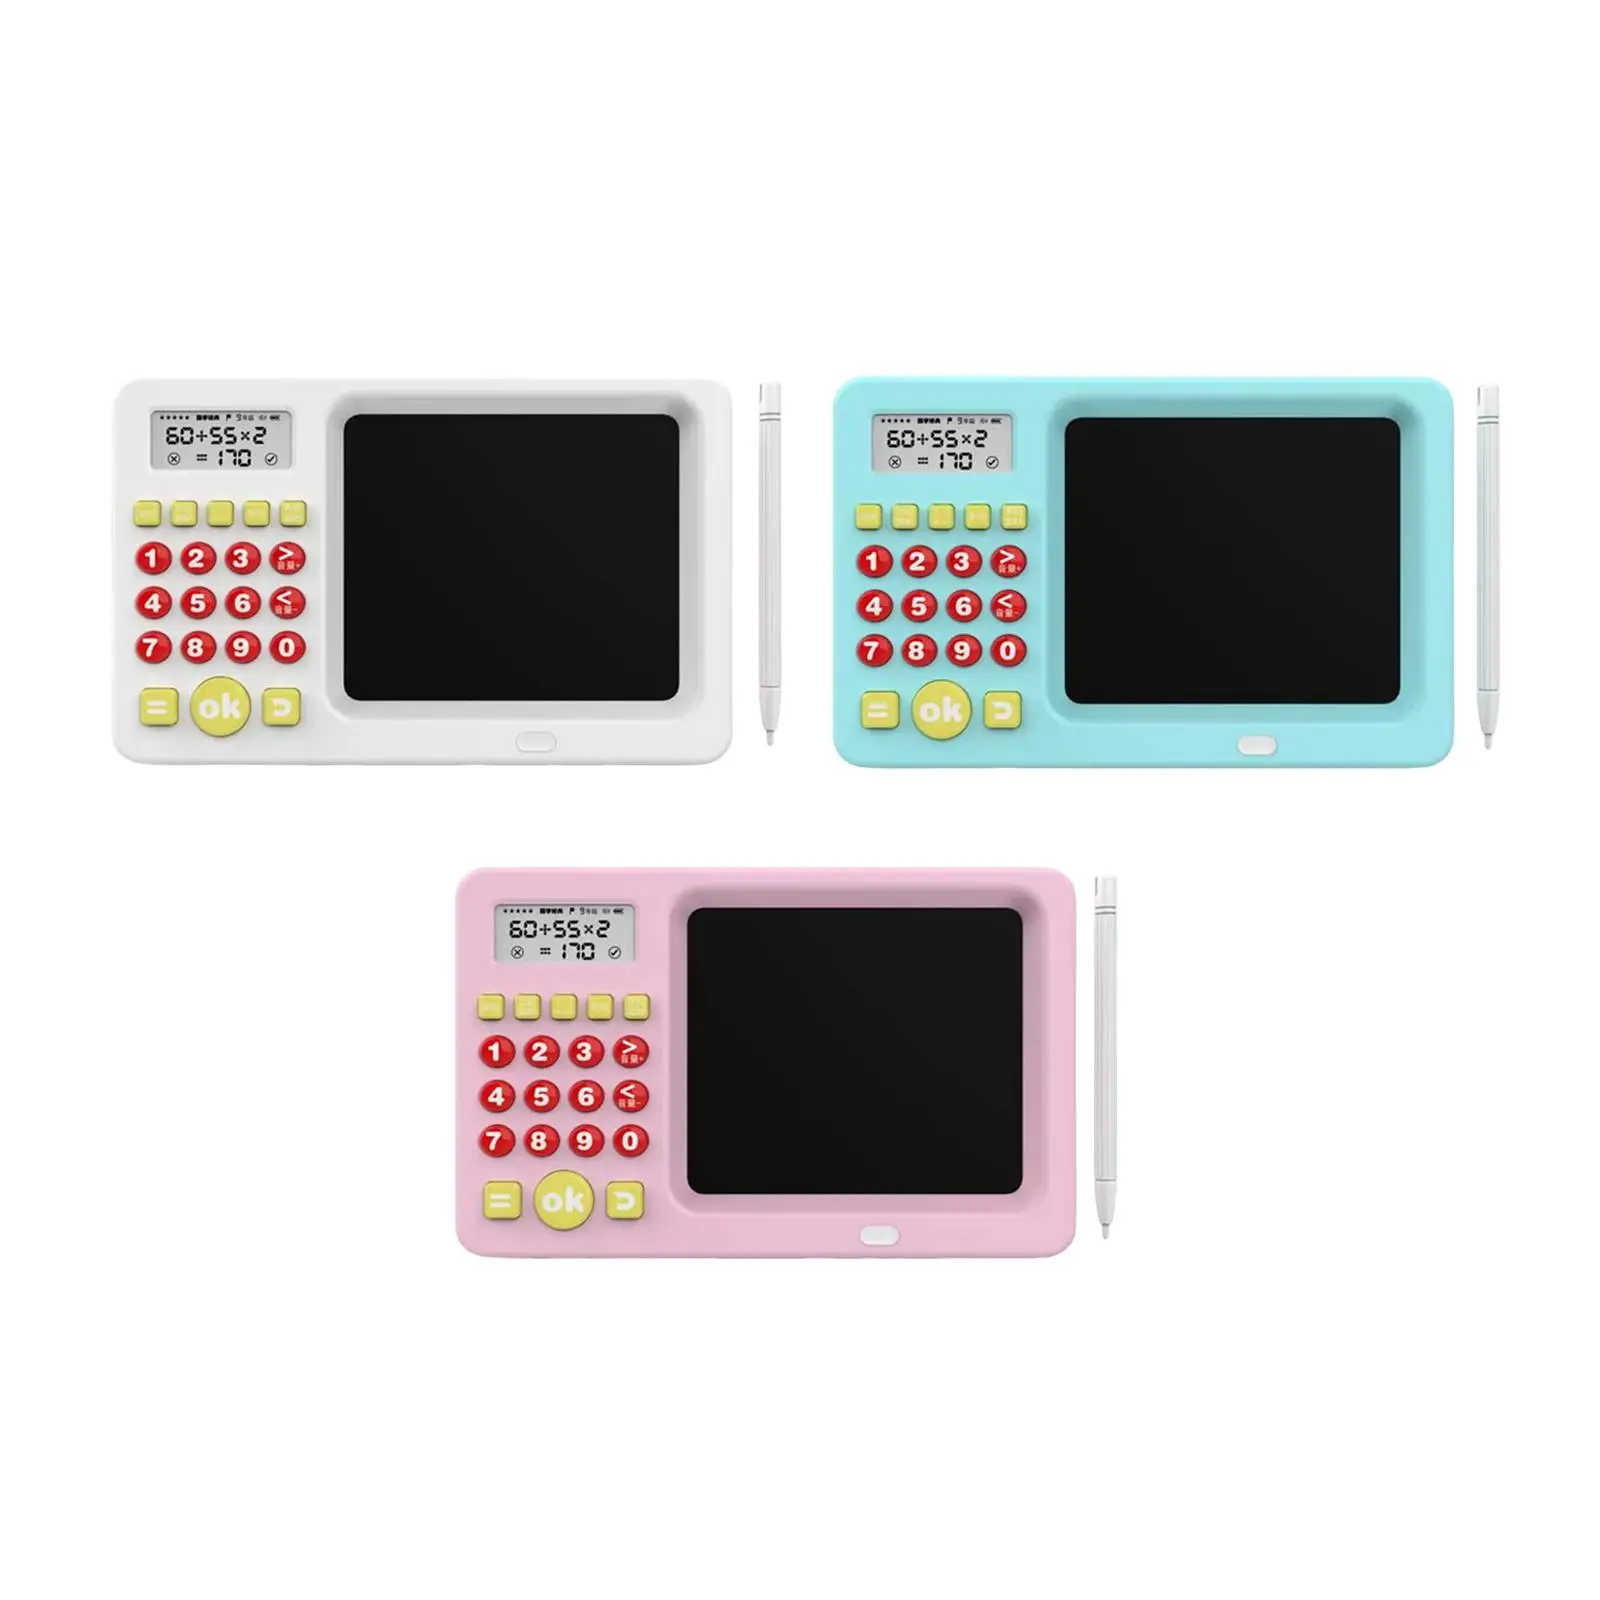 Writing Tablet Mouth Calculator Intelligent Learning Machine Math Game Oral Arithmetic Exercise Machine Boys Kids